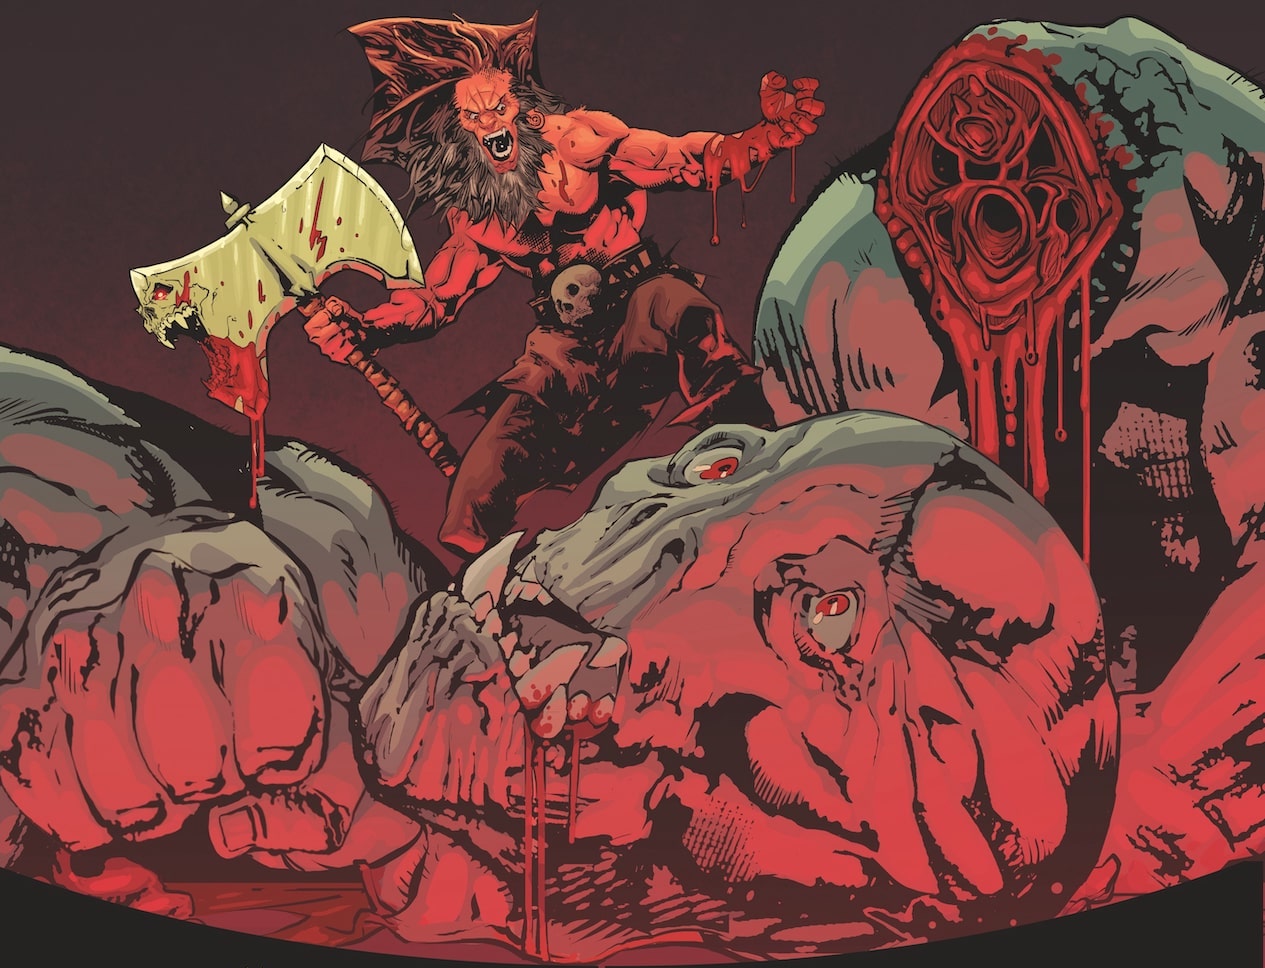 'Barbaric: Axe to Grind' #1 review is as loud, proud, and fun as ever